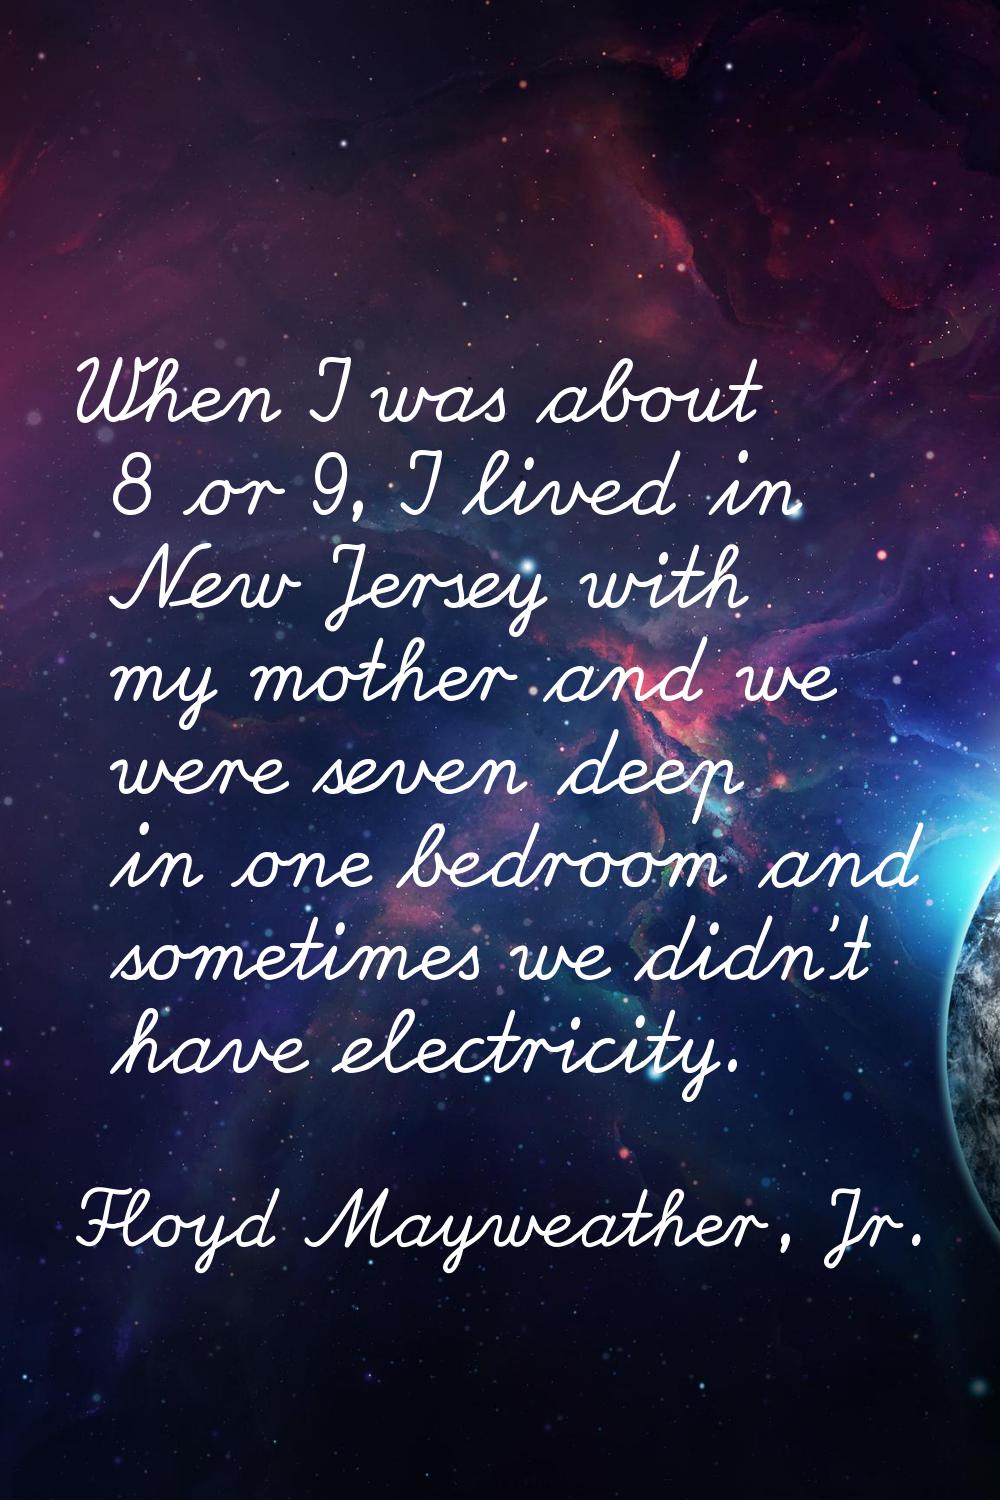 When I was about 8 or 9, I lived in New Jersey with my mother and we were seven deep in one bedroom